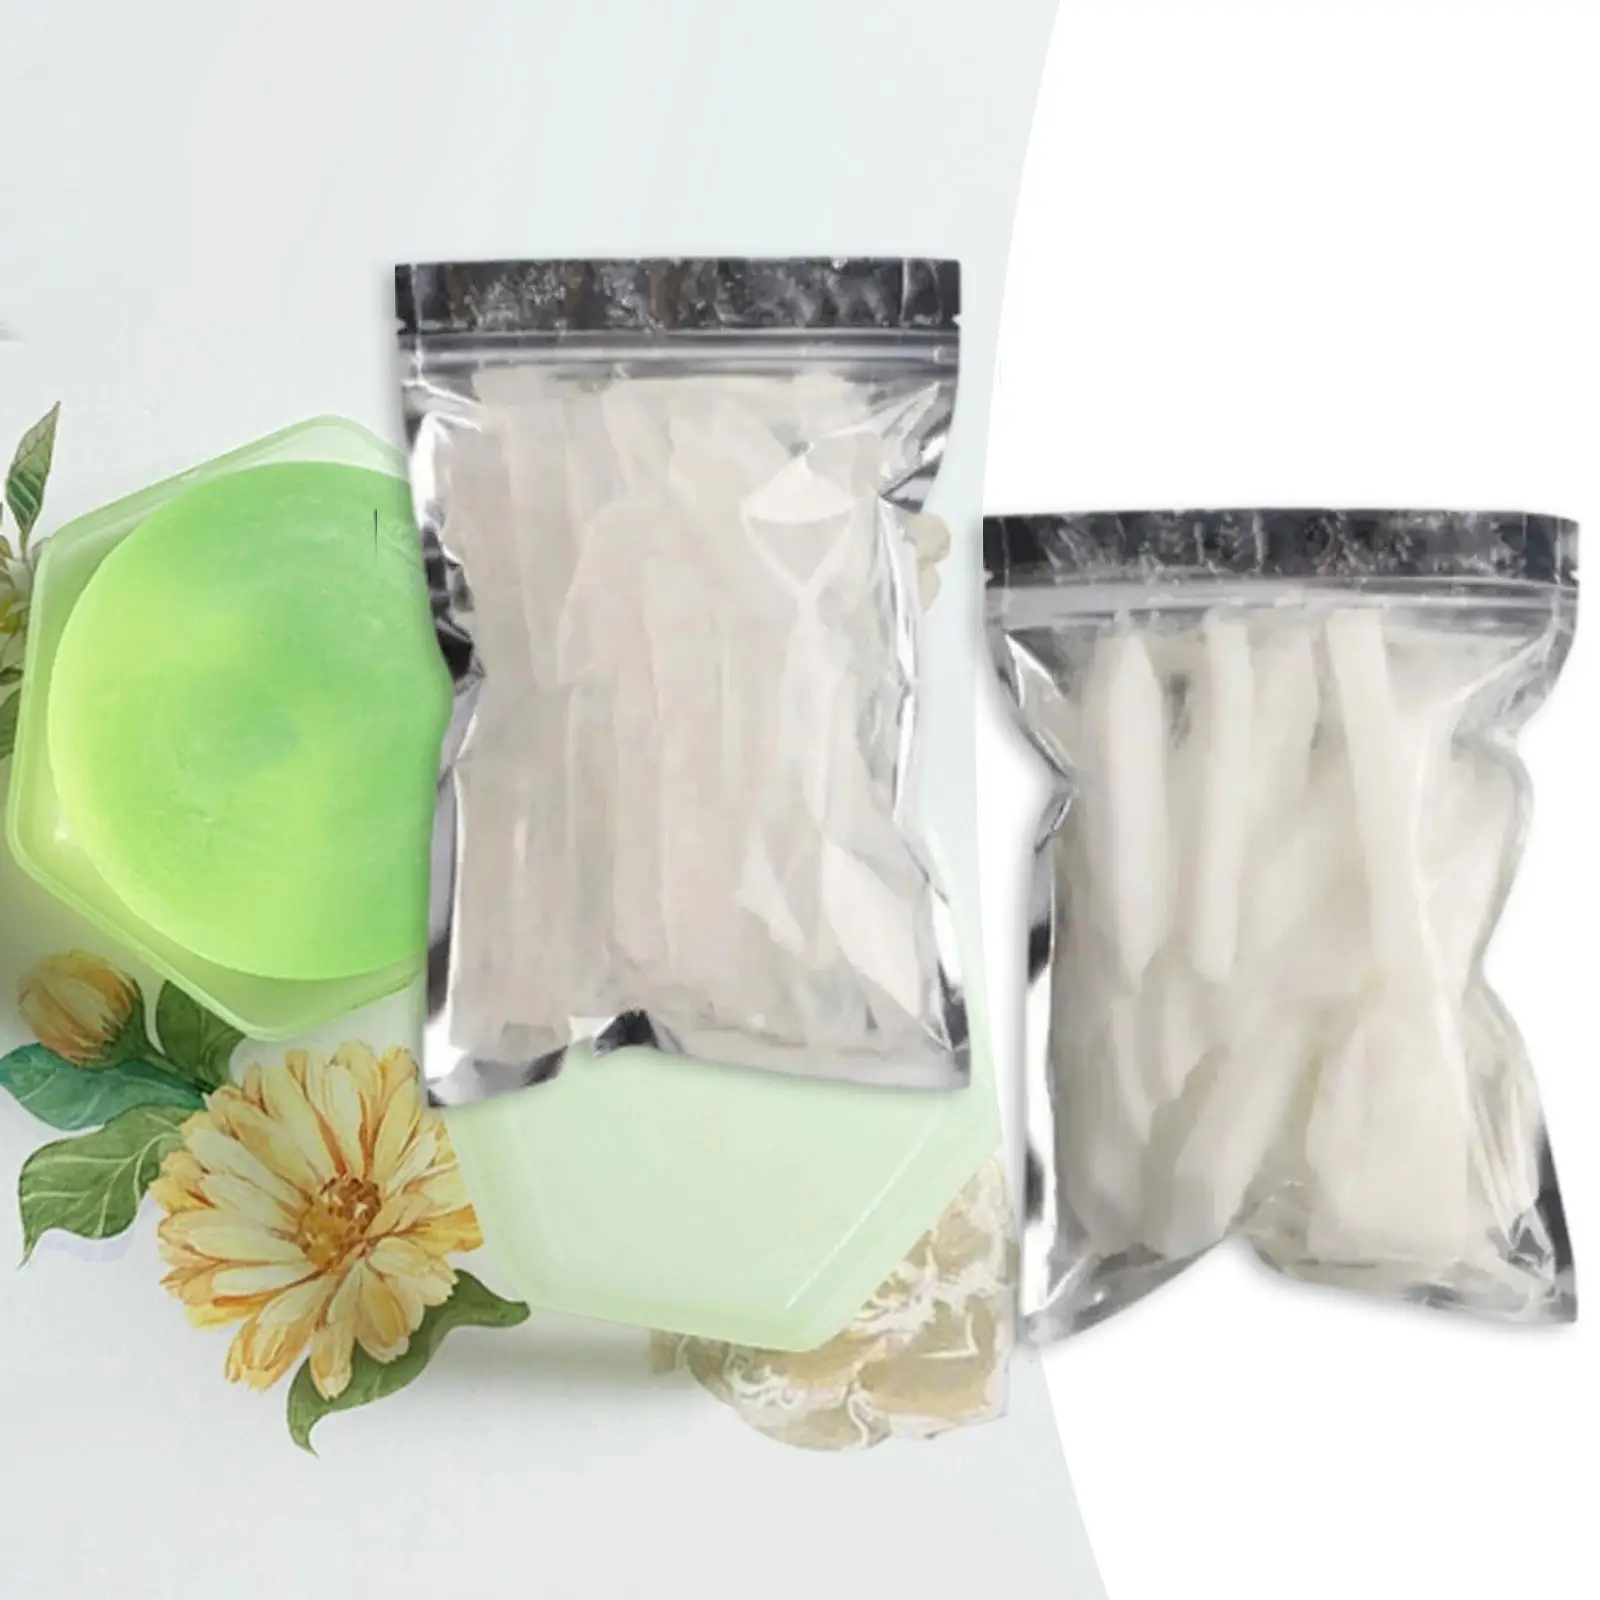 Soap Base Soap DIY Supplies Easy to Make Clear and White Melt and Pour 500G Soap Crafts Handmade Soap Material Men Women